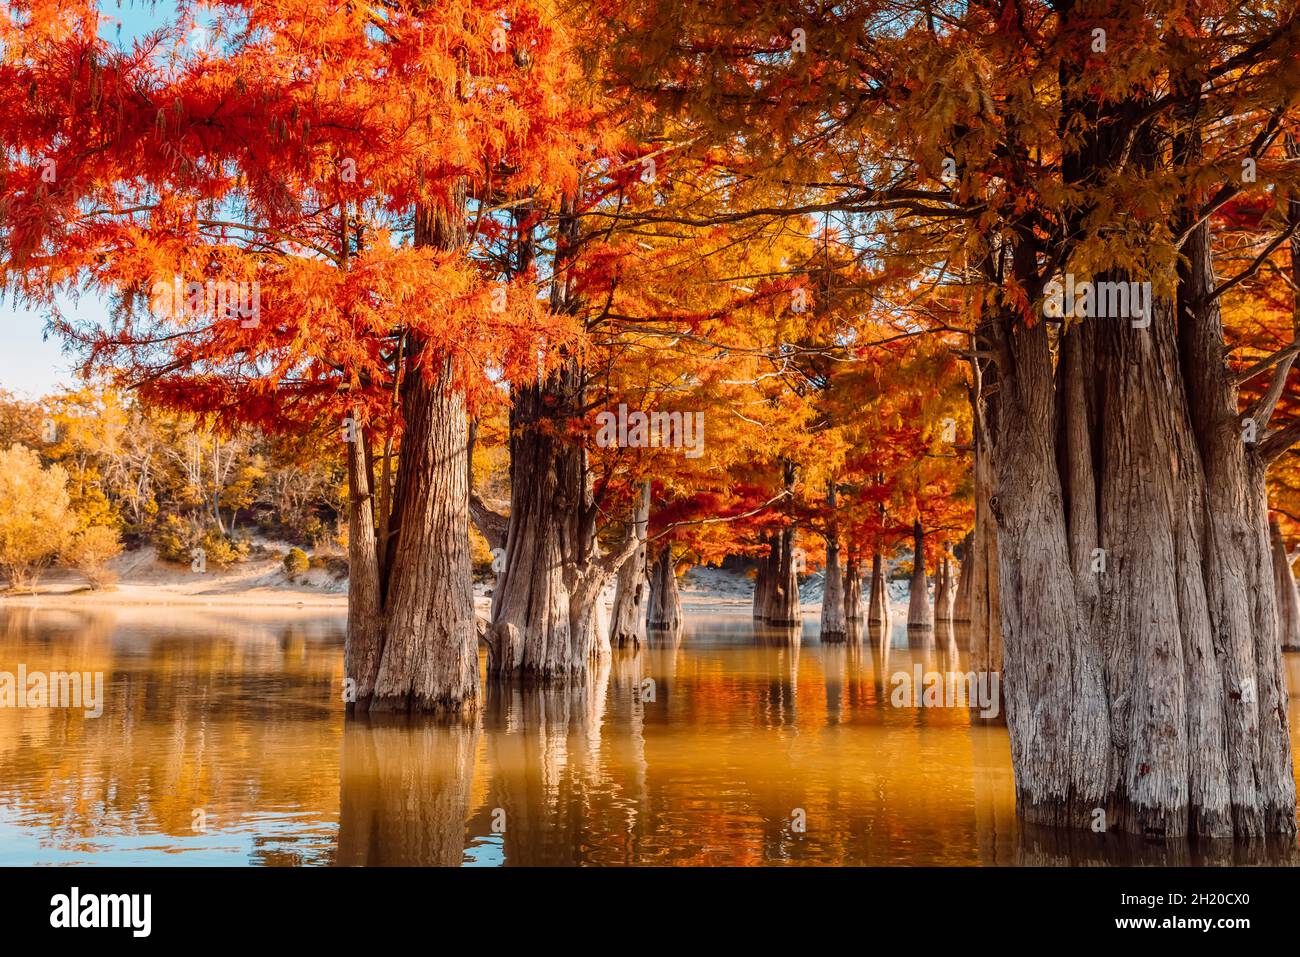 Taxodium distichum with red needles. Autumnal swamp cypresses and lake with reflection. Stock Photo